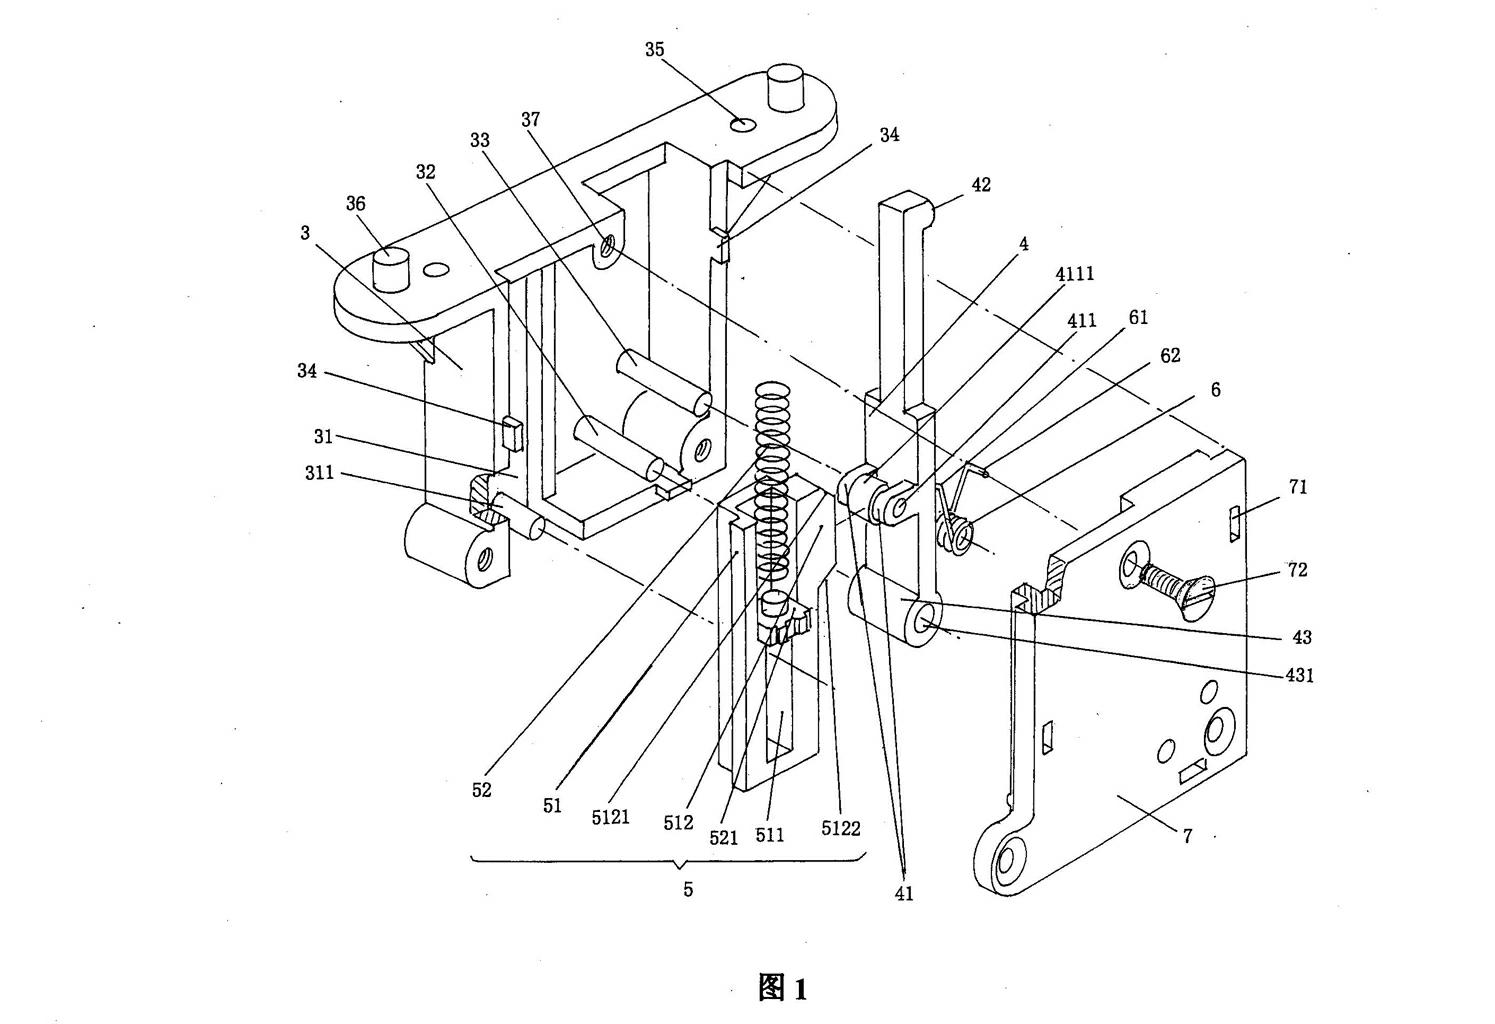 Interlocking device of draw-out circuit breaker